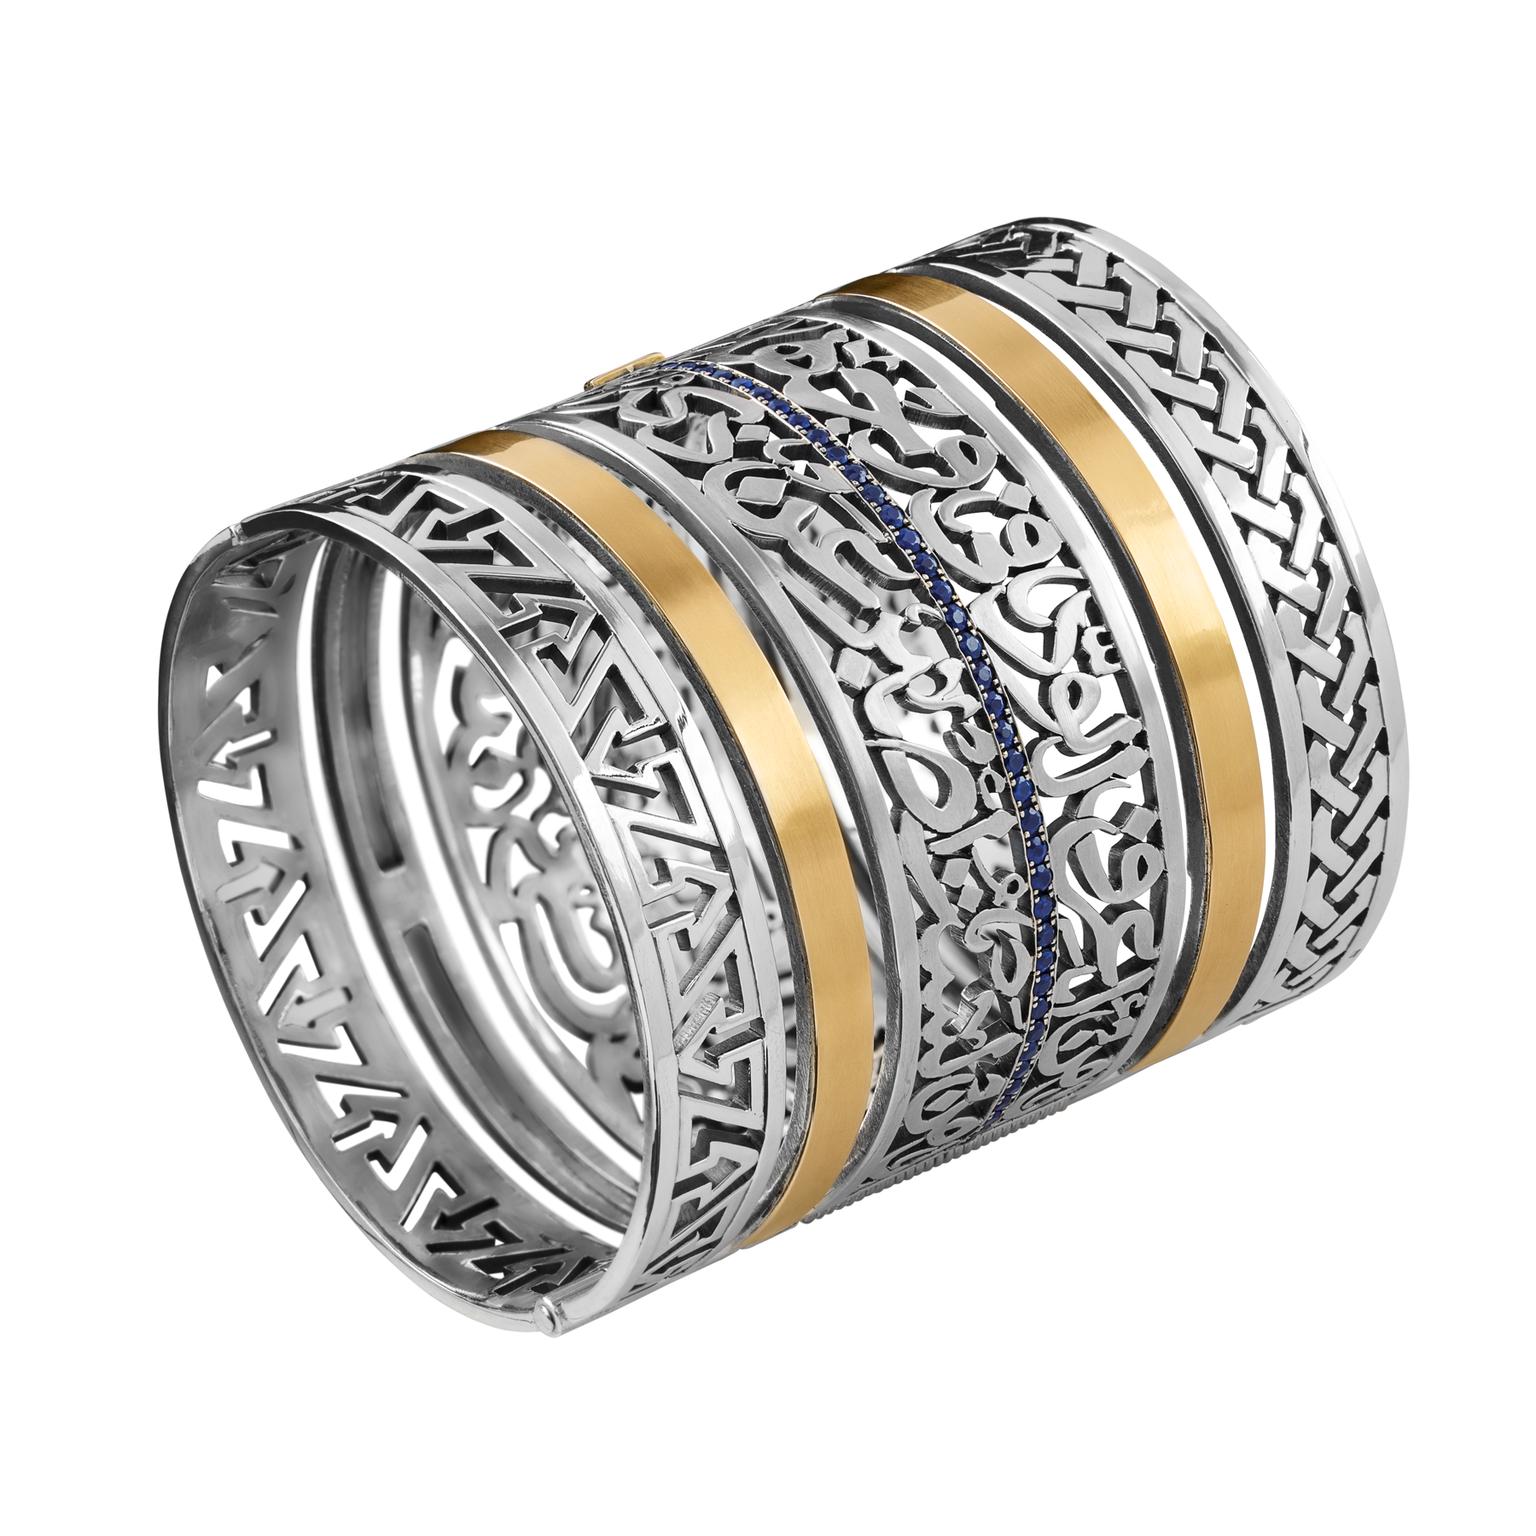 Azza Fahmy Wonders of Nature classic cuff with sapphires, inscribed with poetry